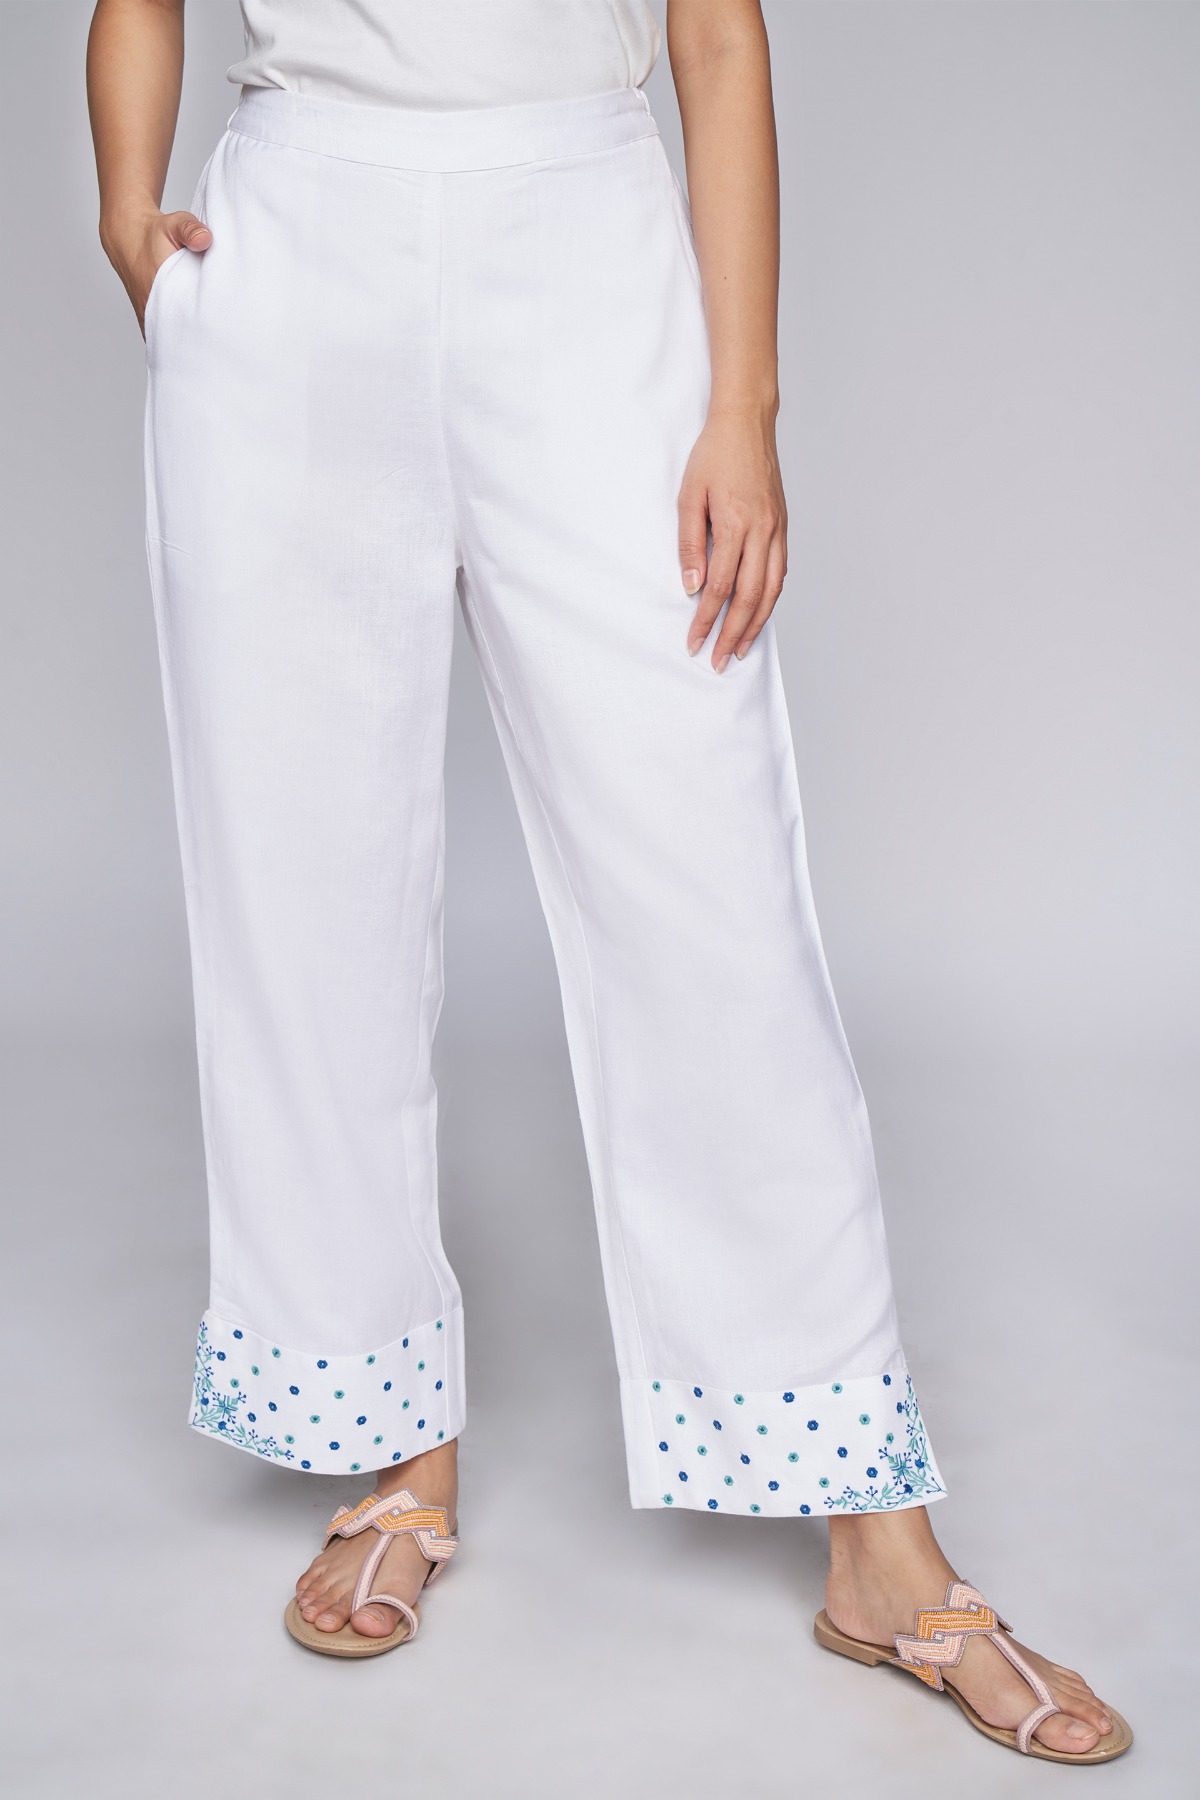 Casual Wear White Women Chikan Palazzo Pant, Size: S-xxl at Rs 180/piece in  Barabanki